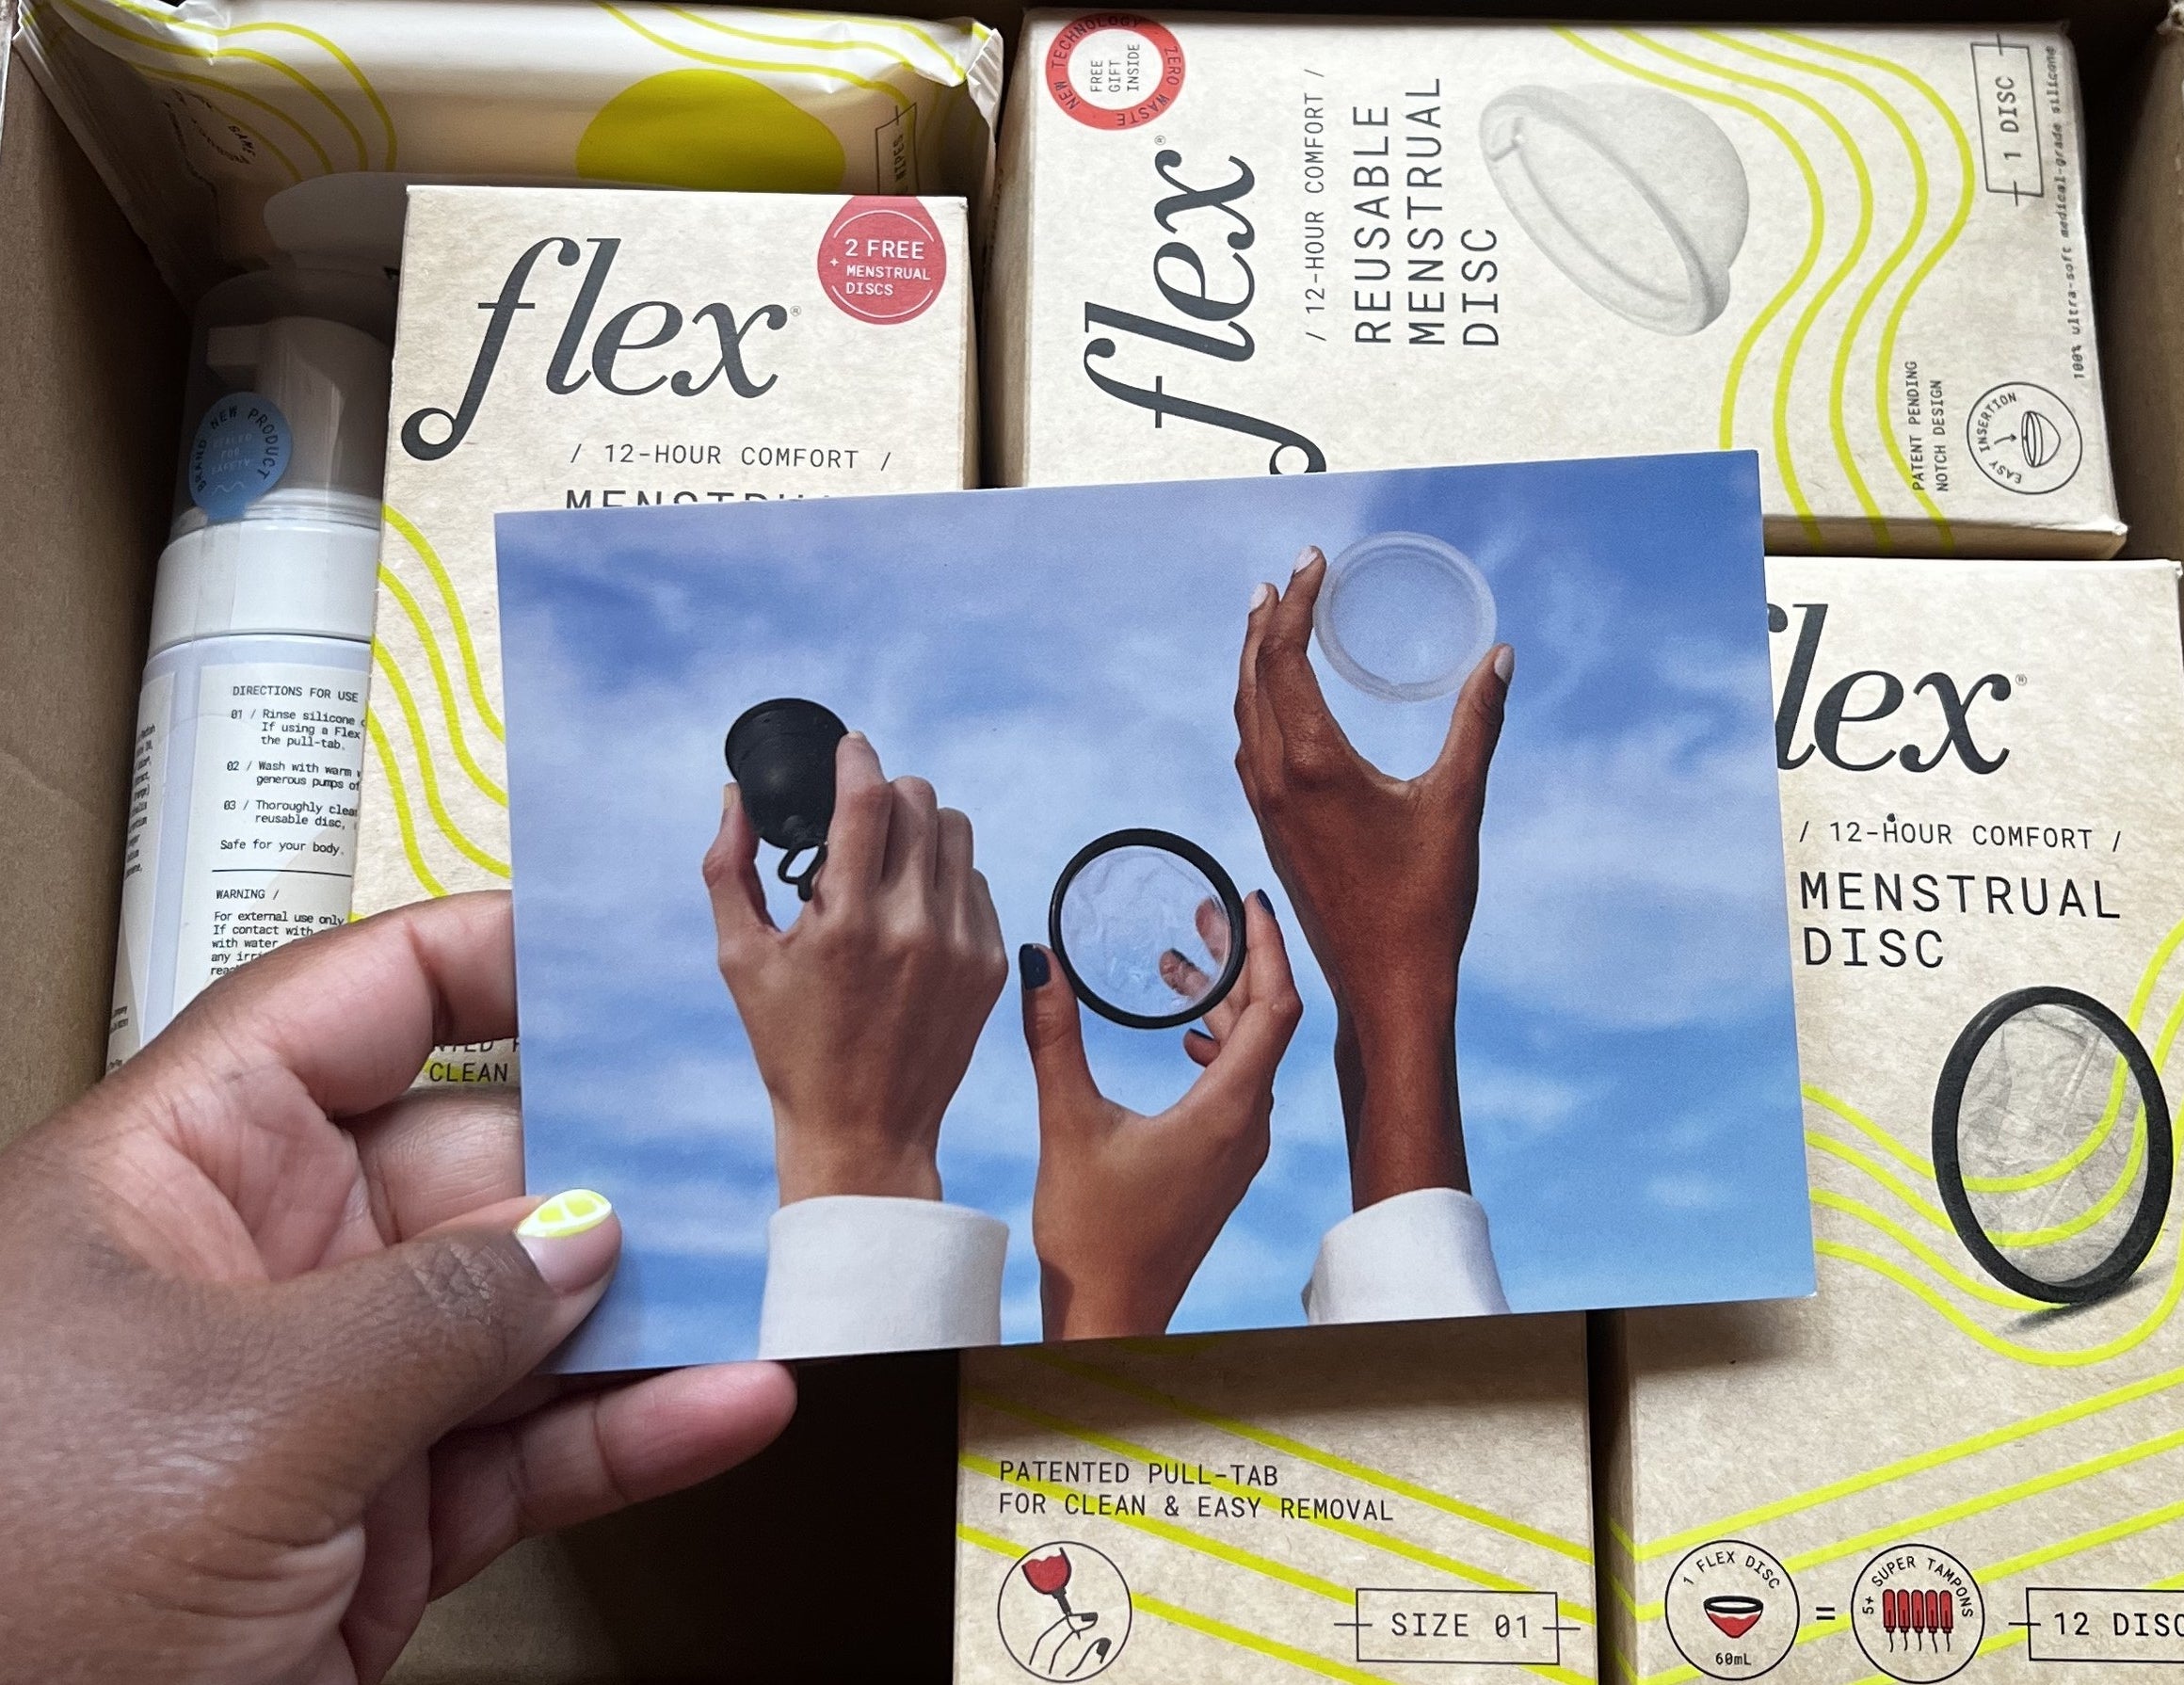 Hand holding flyer in front of box of Flex period products